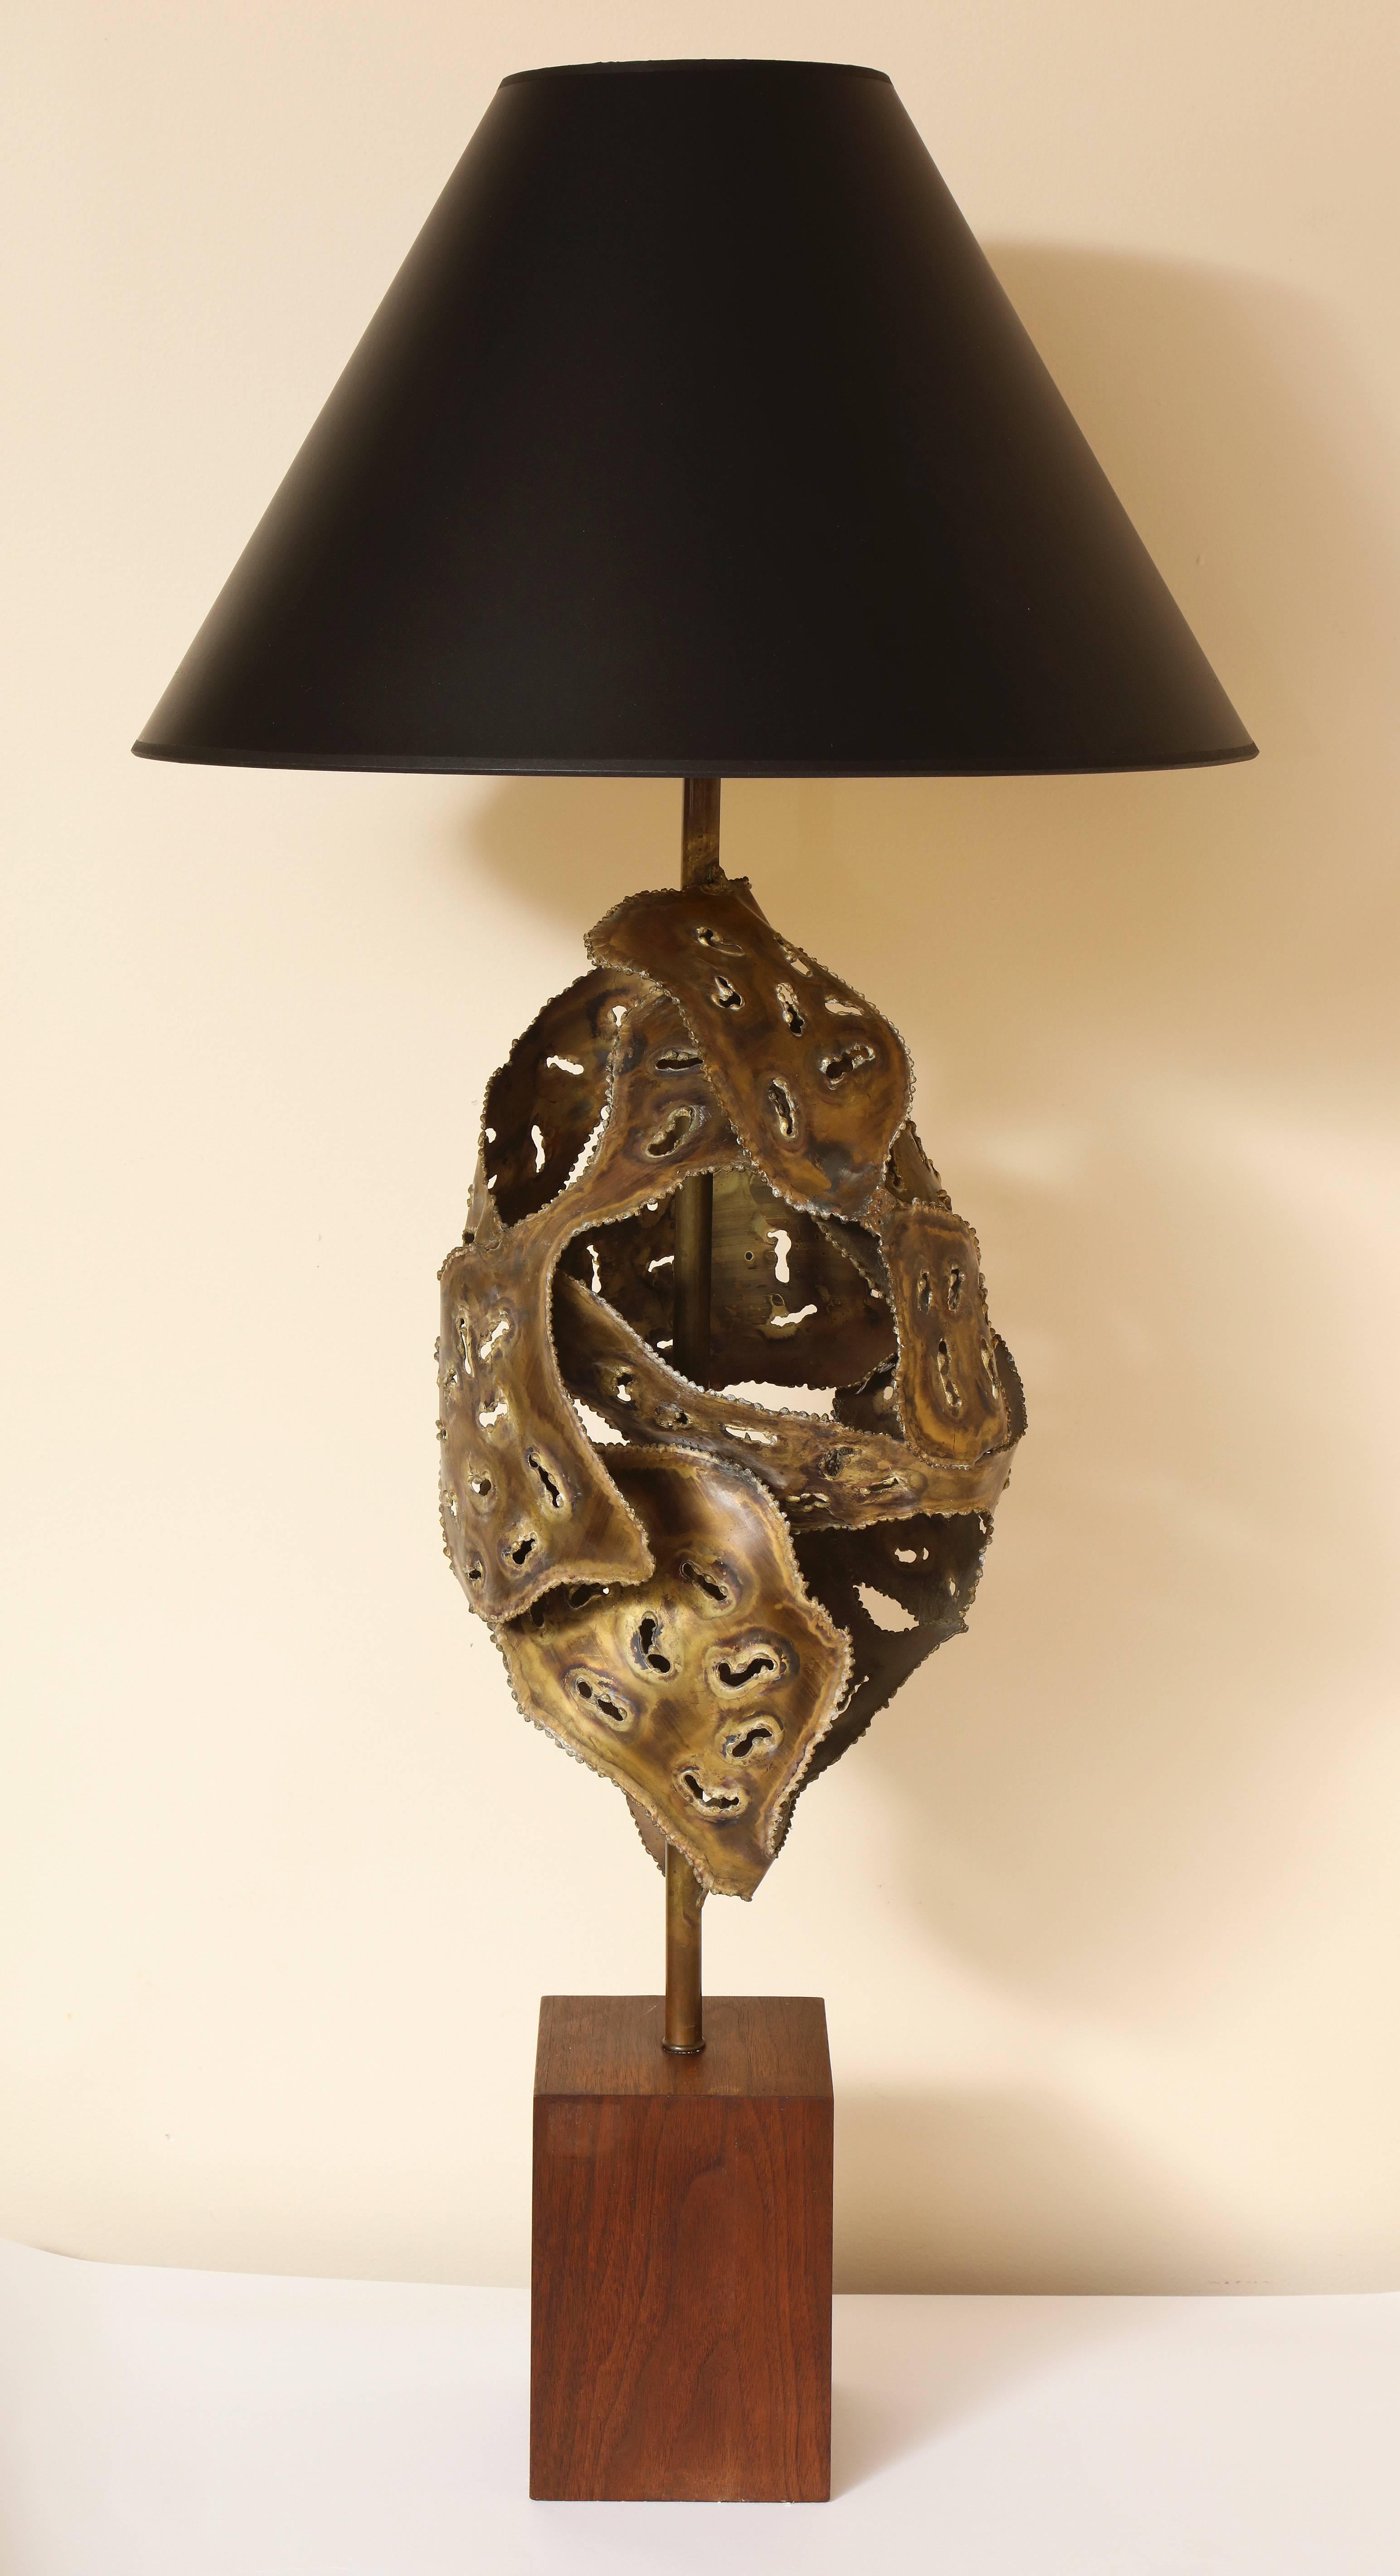 A dramatic and unique sculptural Brutalist welded metal table lamp with pierced design, supported on a wood plinth base. 

Dimensions: 40